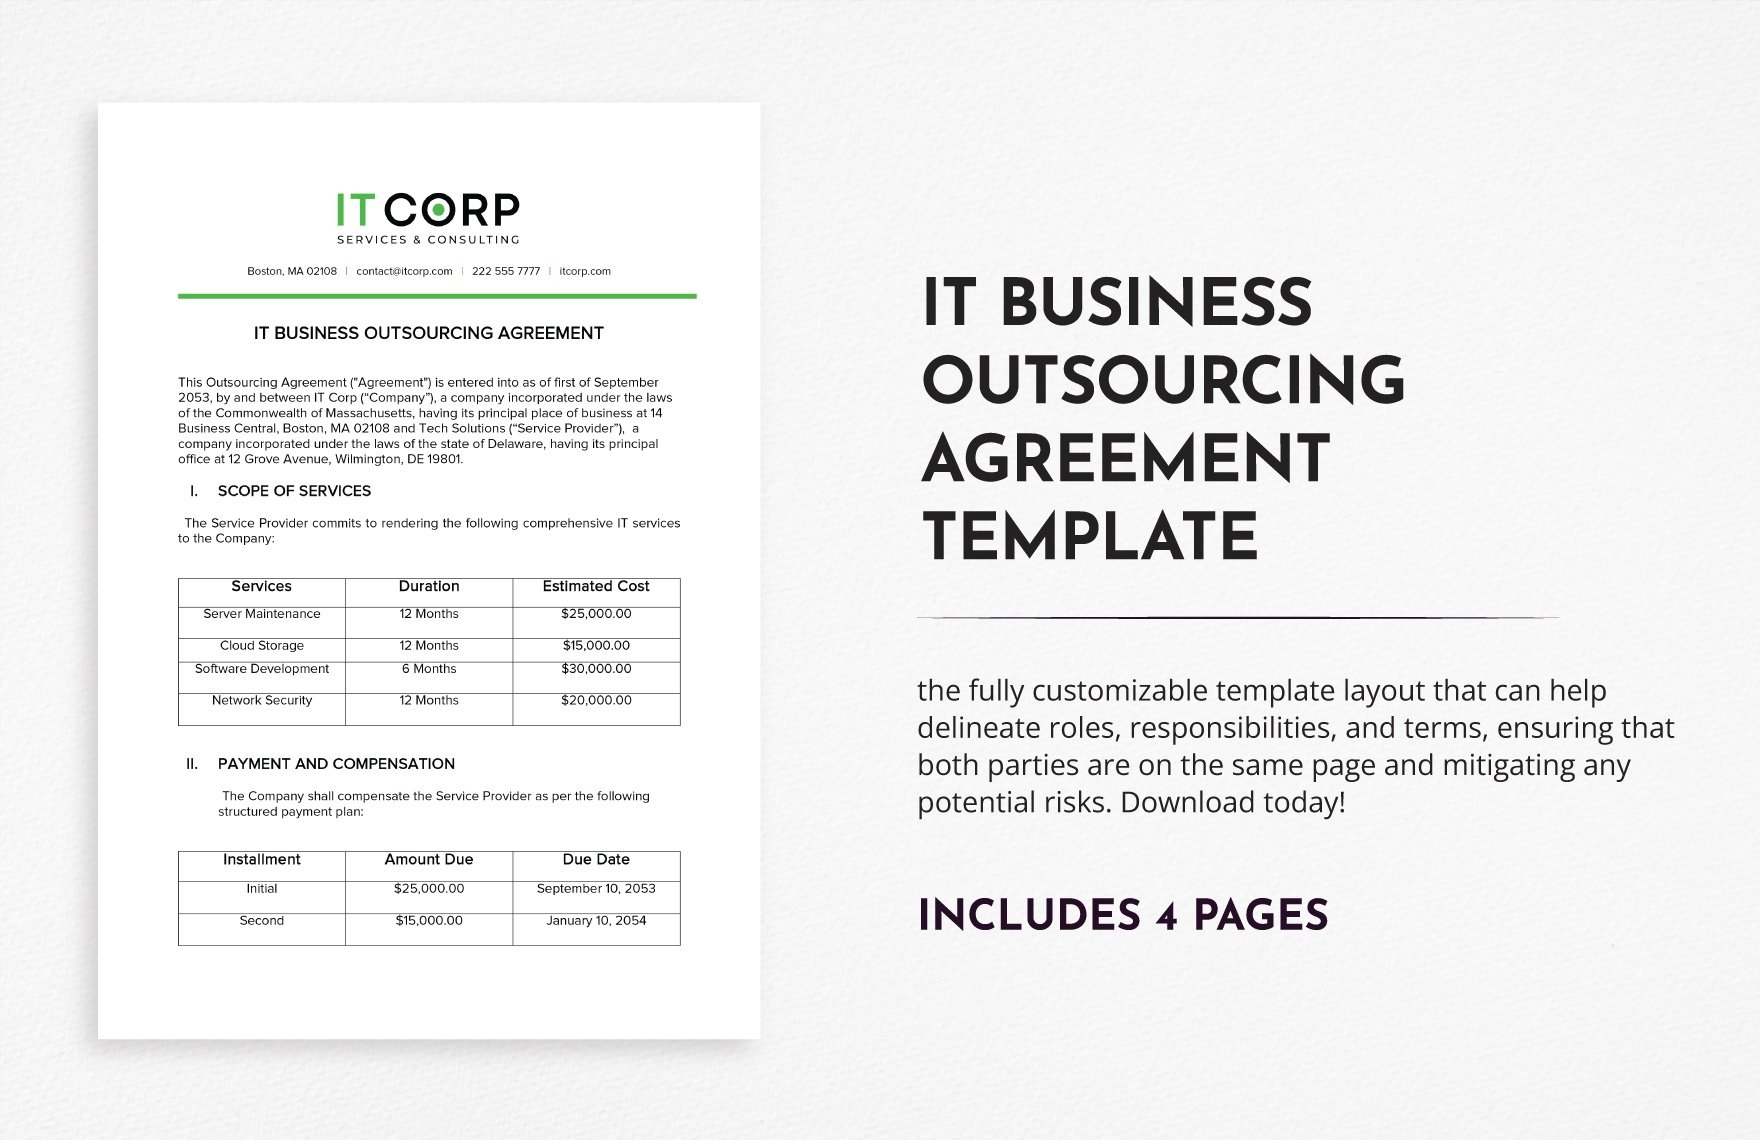 IT Business Outsourcing Agreement Template